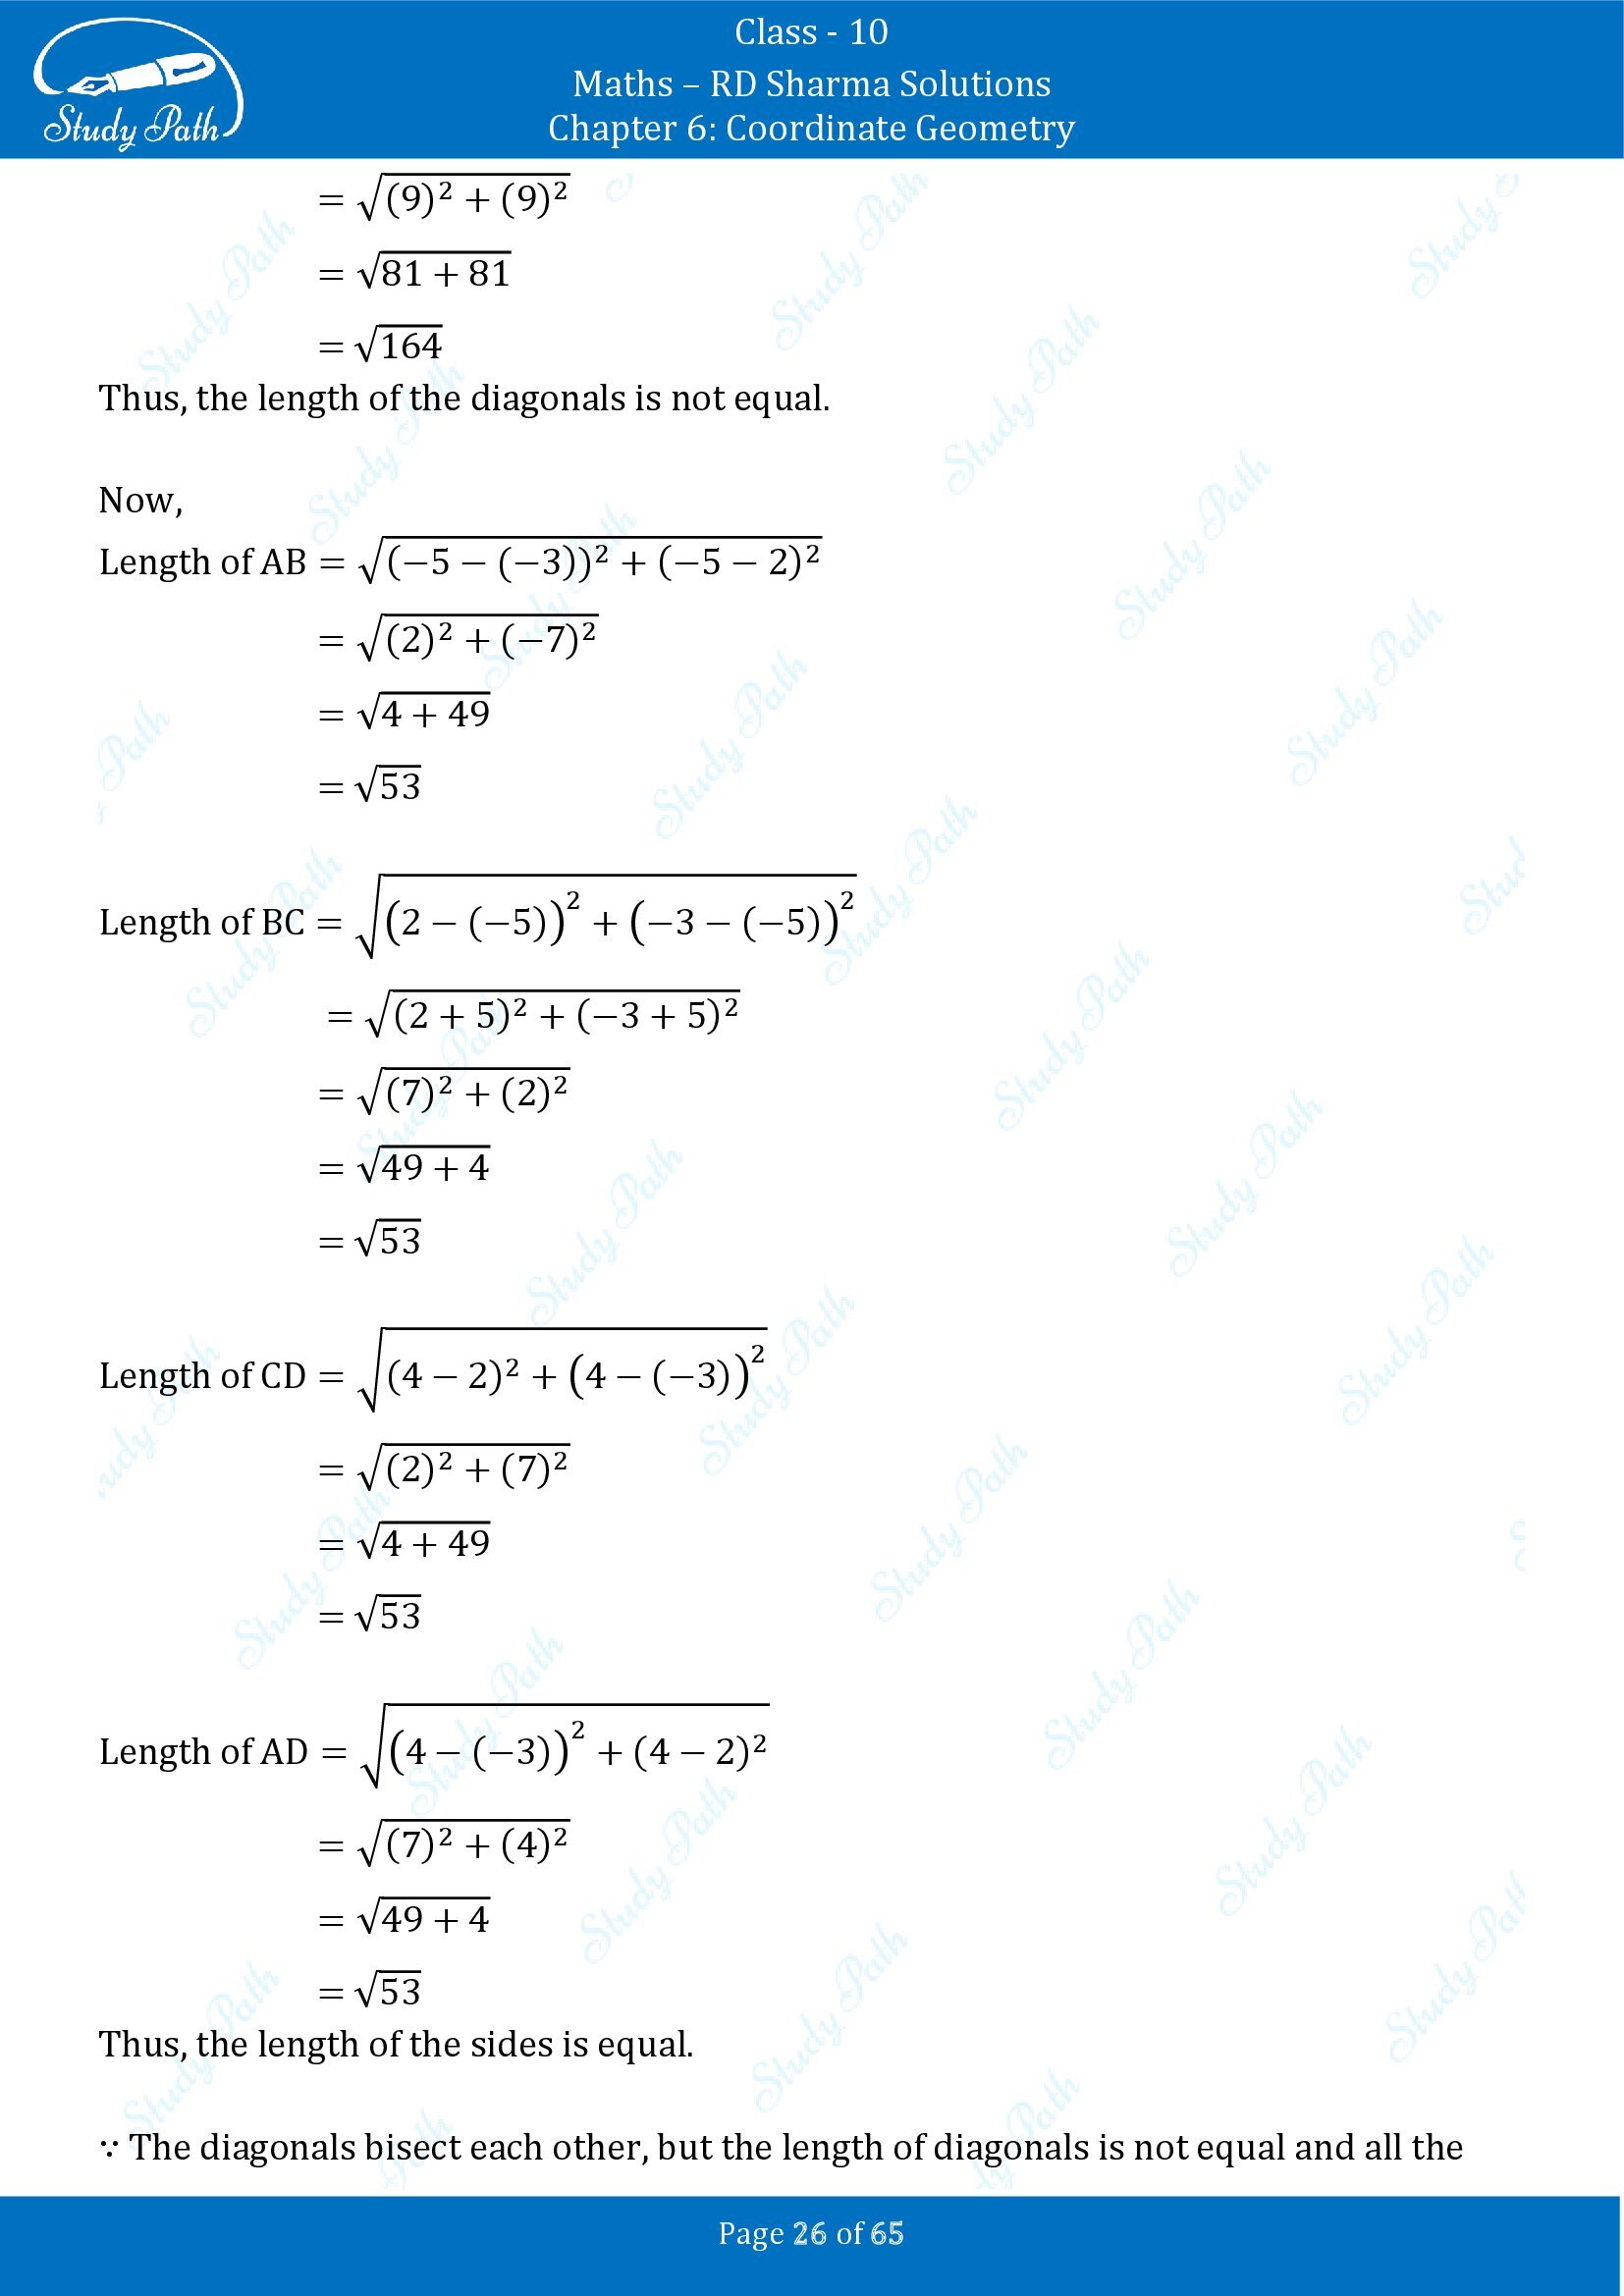 RD Sharma Solutions Class 10 Chapter 6 Coordinate Geometry Exercise 6.3 00026